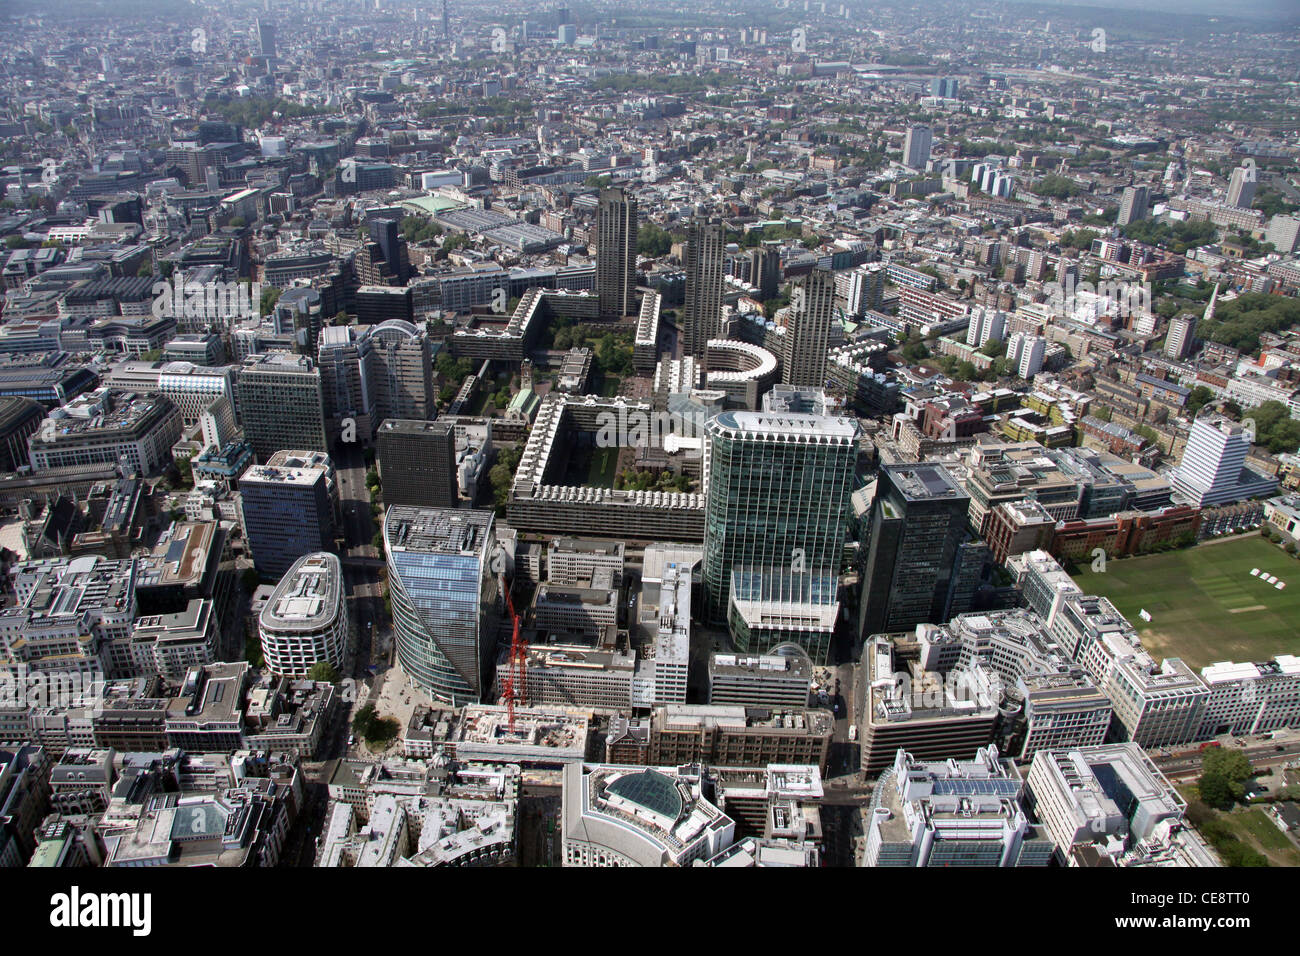 Aerial image of Moorgate / Barbican areas of London EC2 Stock Photo